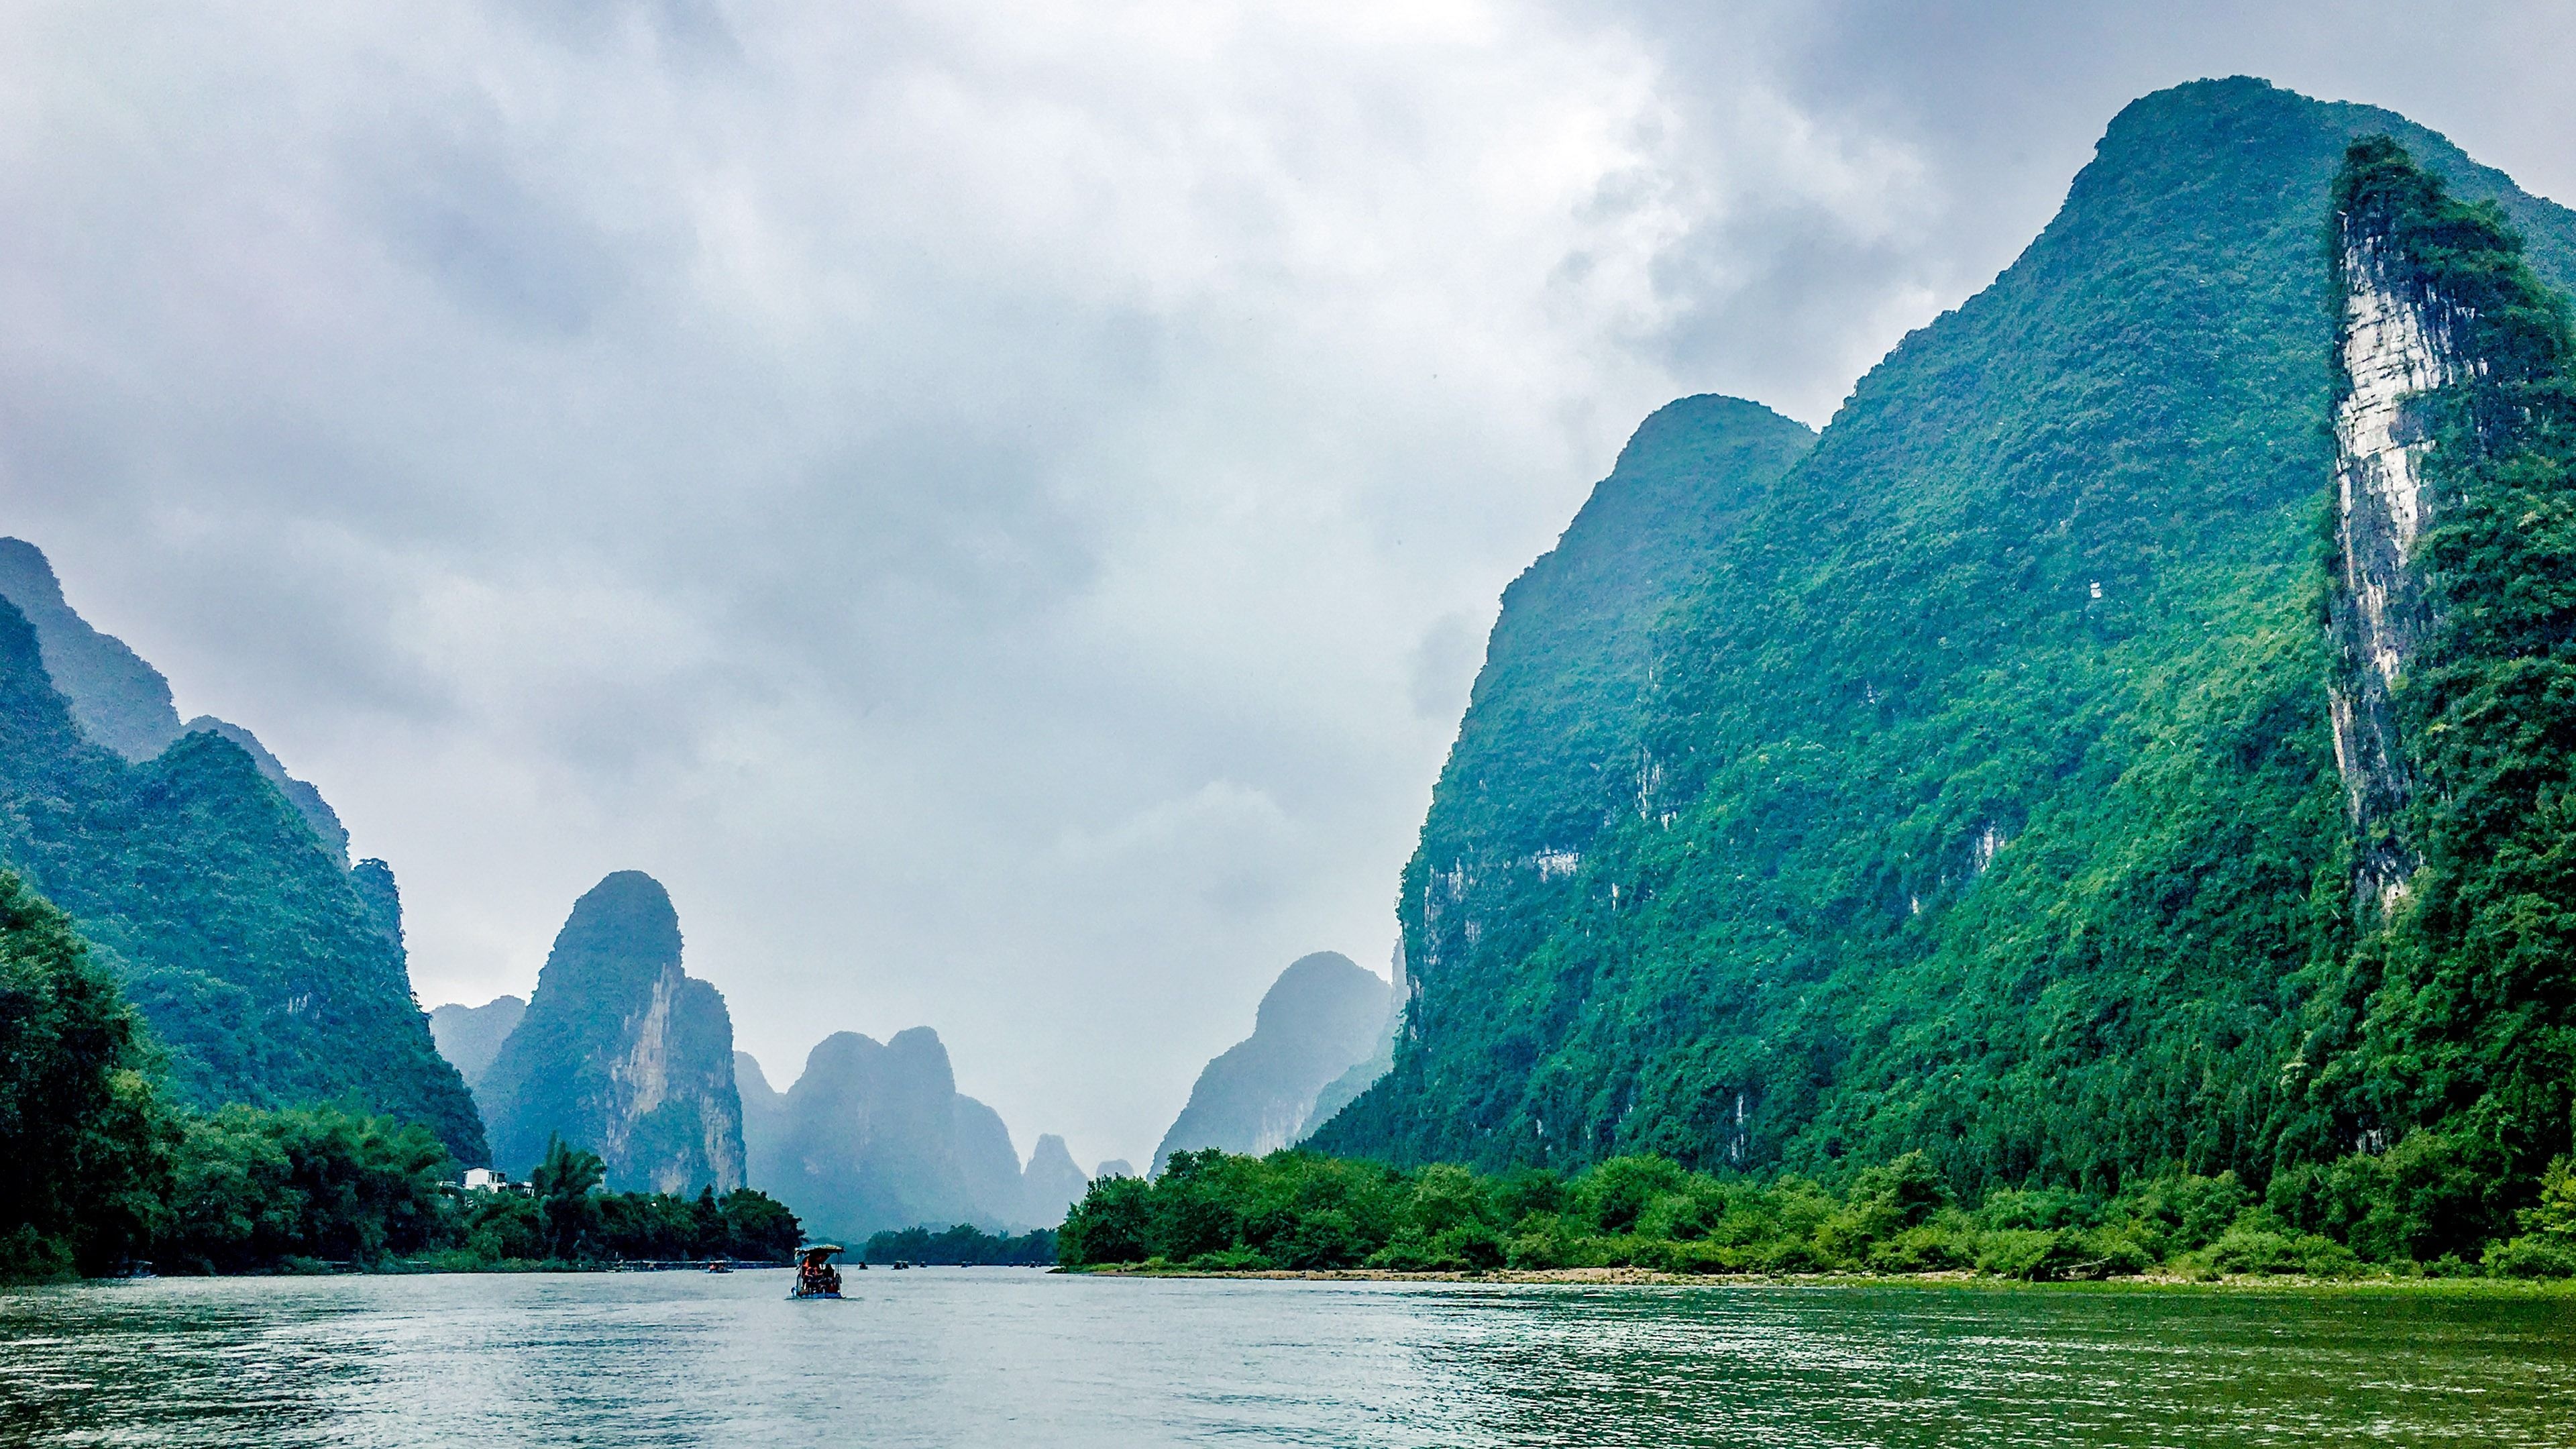 Landscape: The Li River in China, Karst mountains and terraces, Traditional Chinese small boat. 3840x2160 4K Wallpaper.